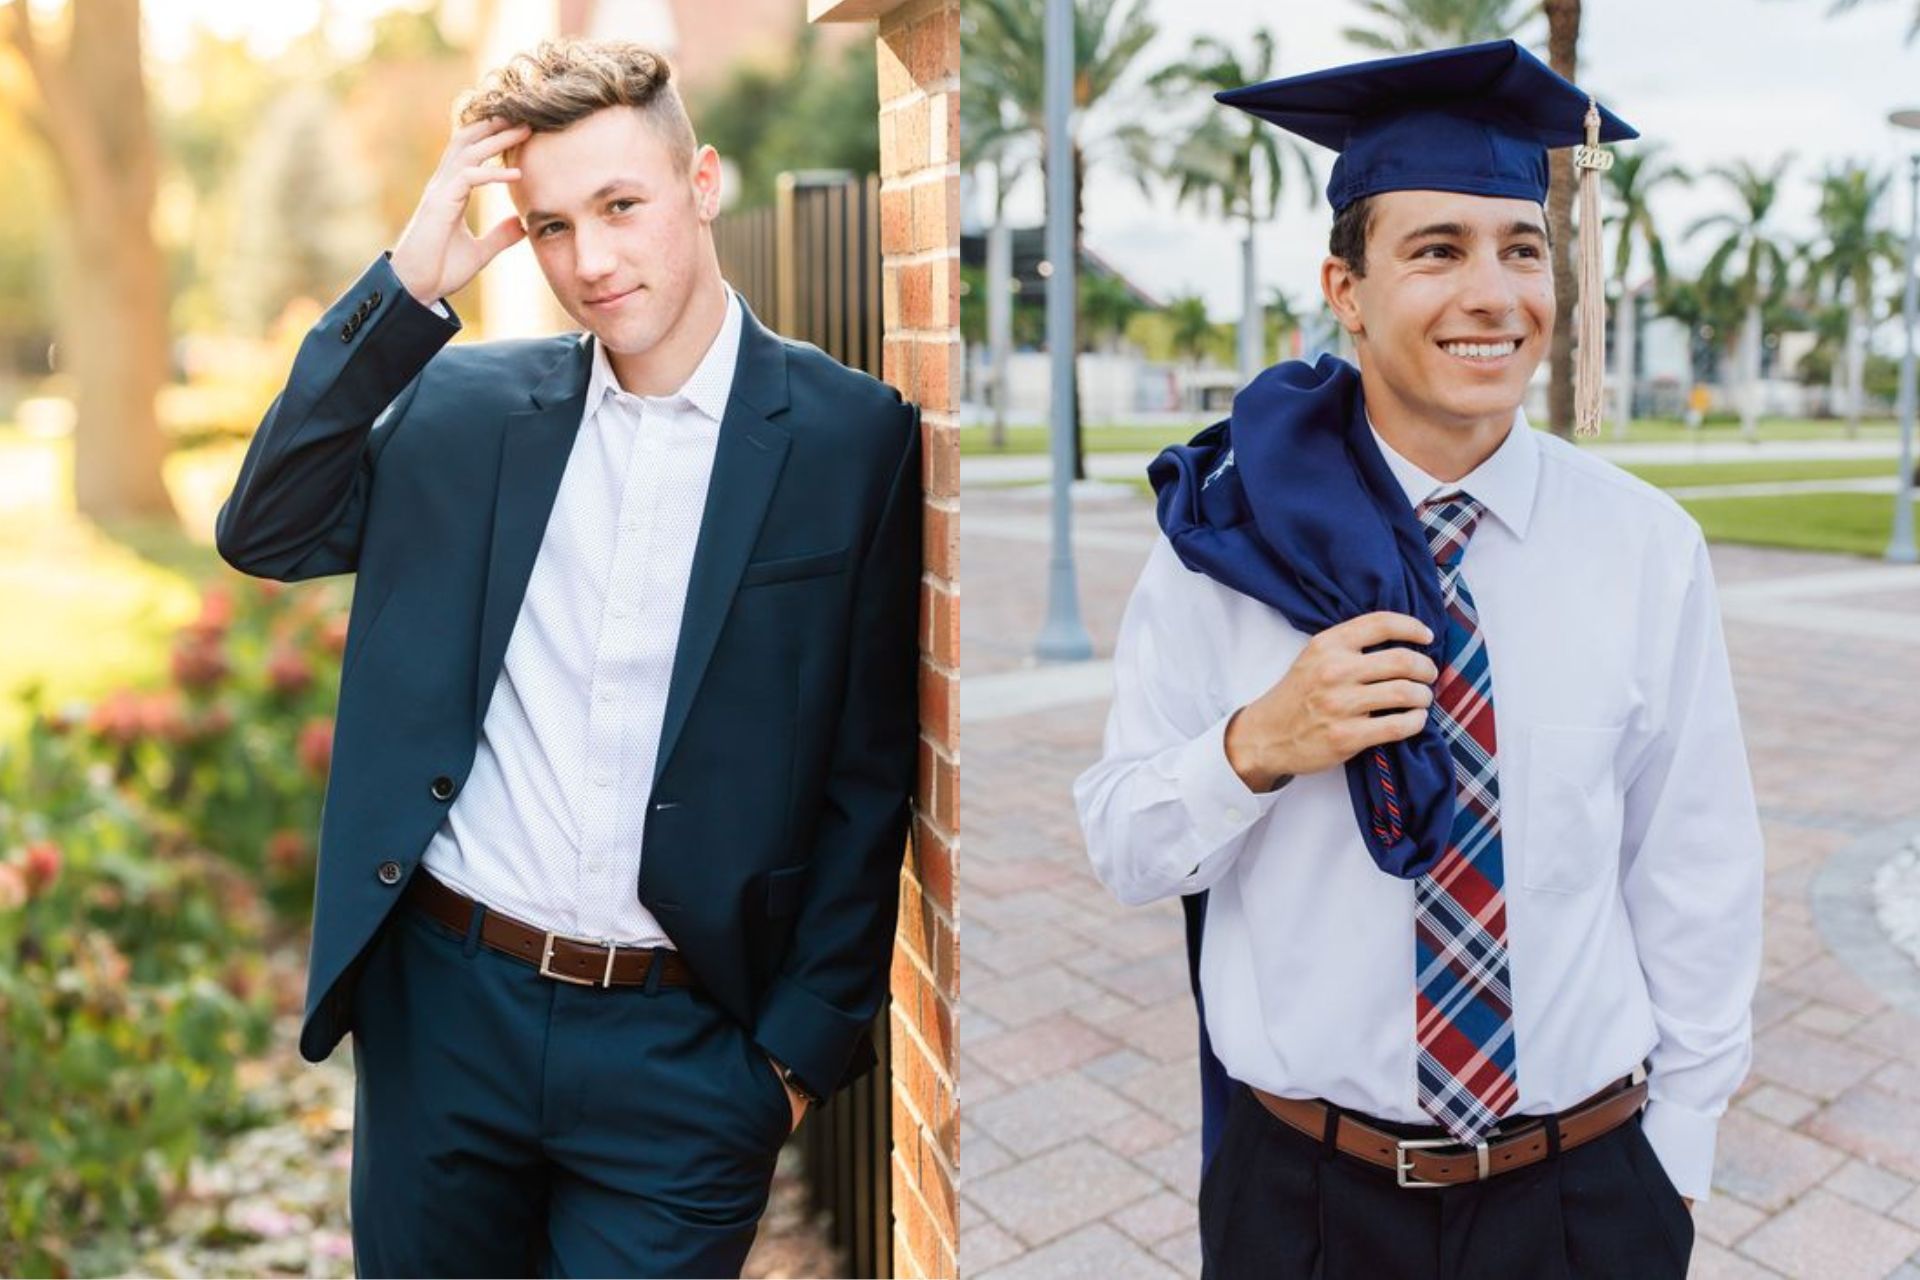 Top 30 Best Graduation Outfits For Guys Outfit Ideas HQ, 46% OFF